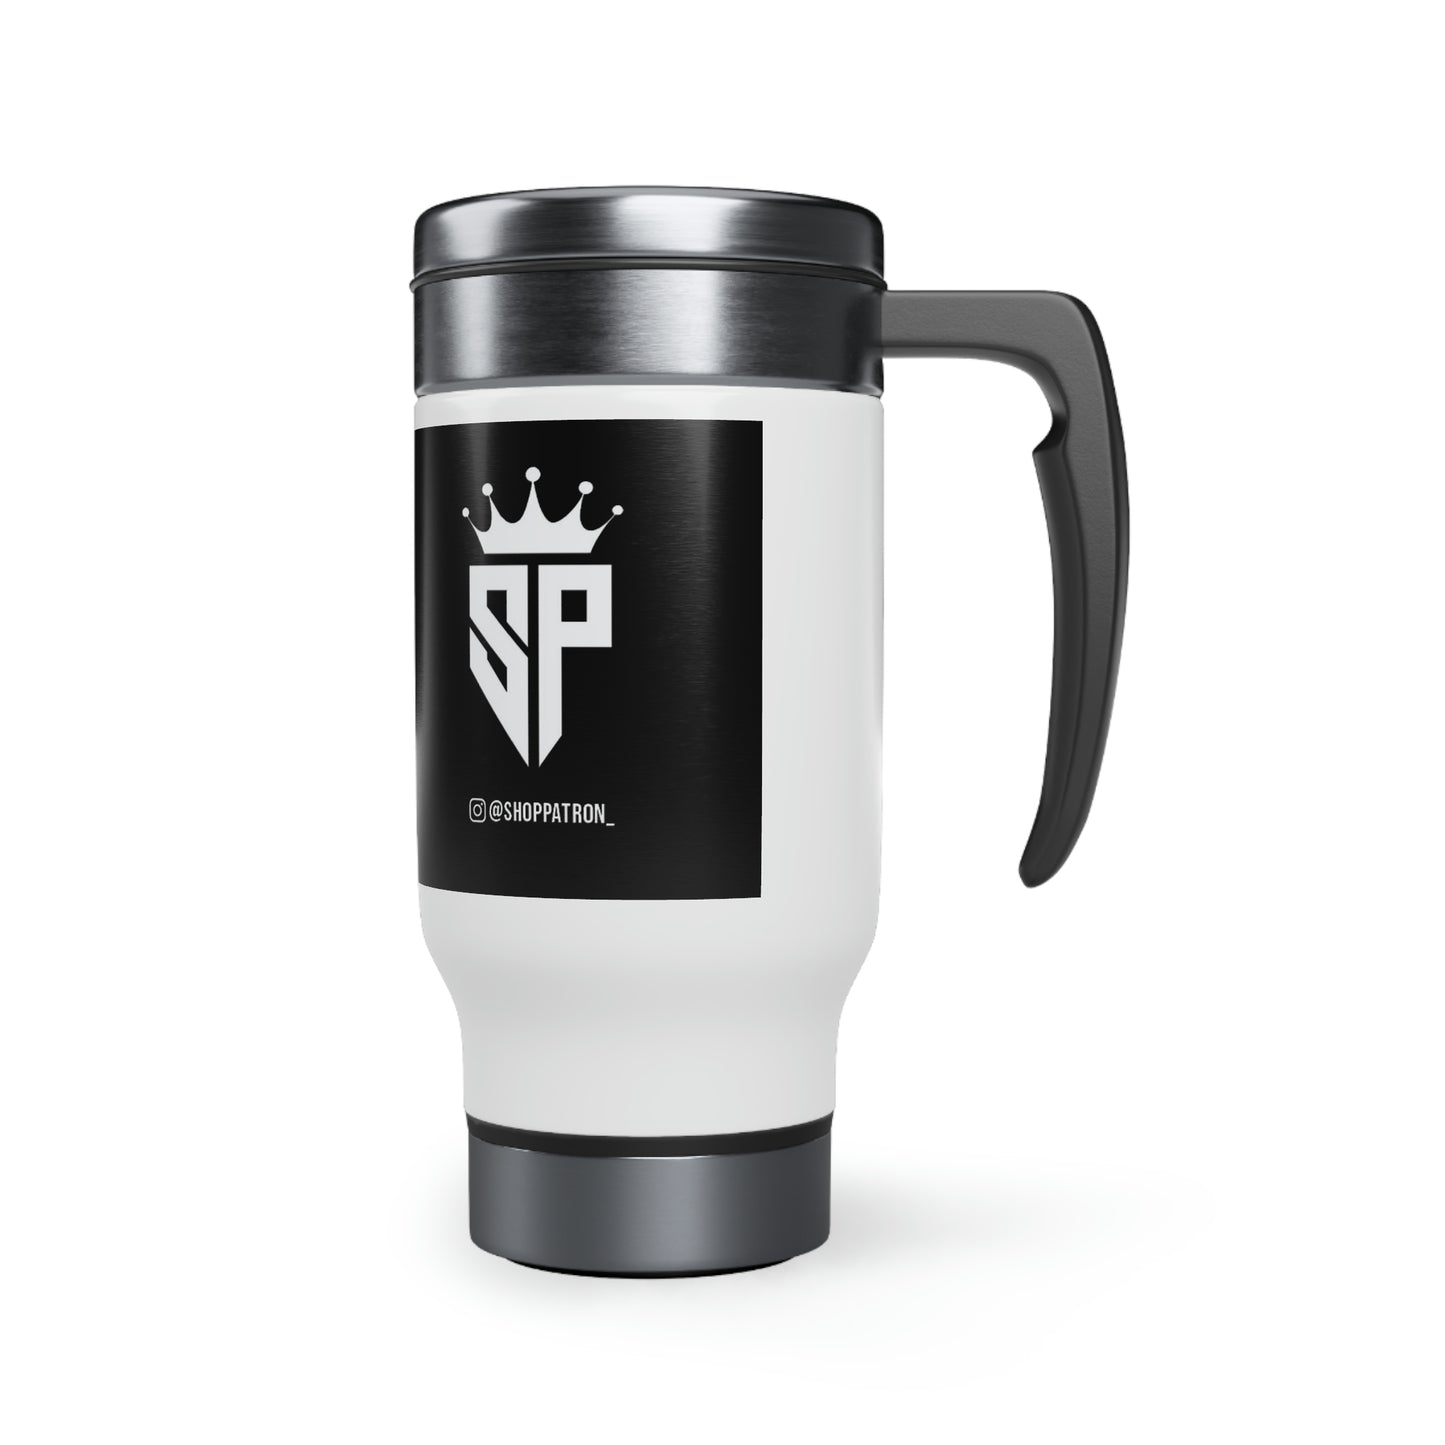 Shop Patron Stainless Steel Travel Mug with Handle, 14oz